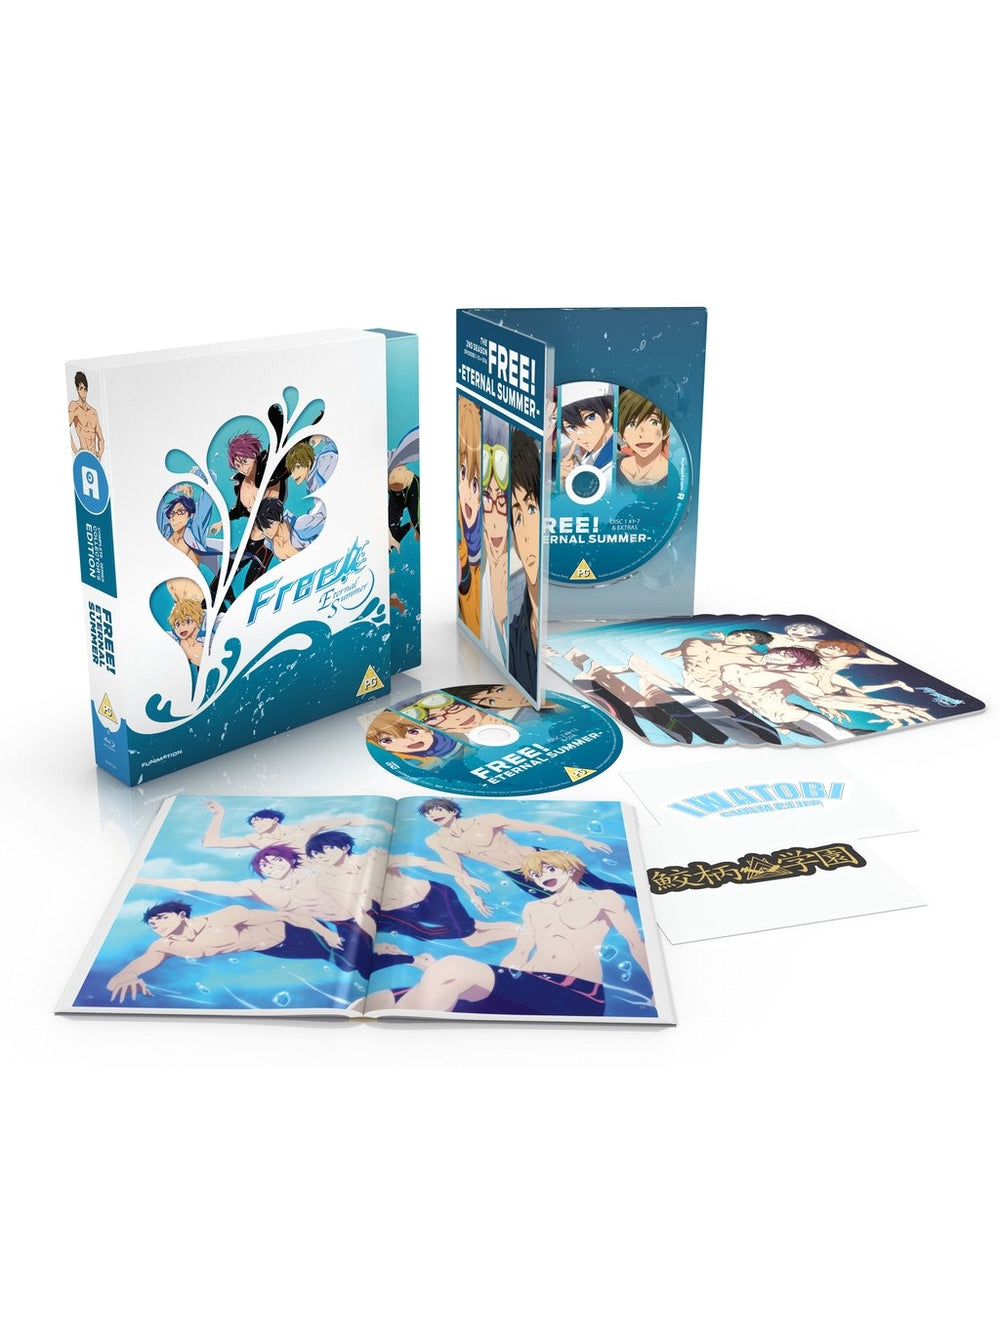 Free! -Eternal Summer- Blu-ray Collector's Edition